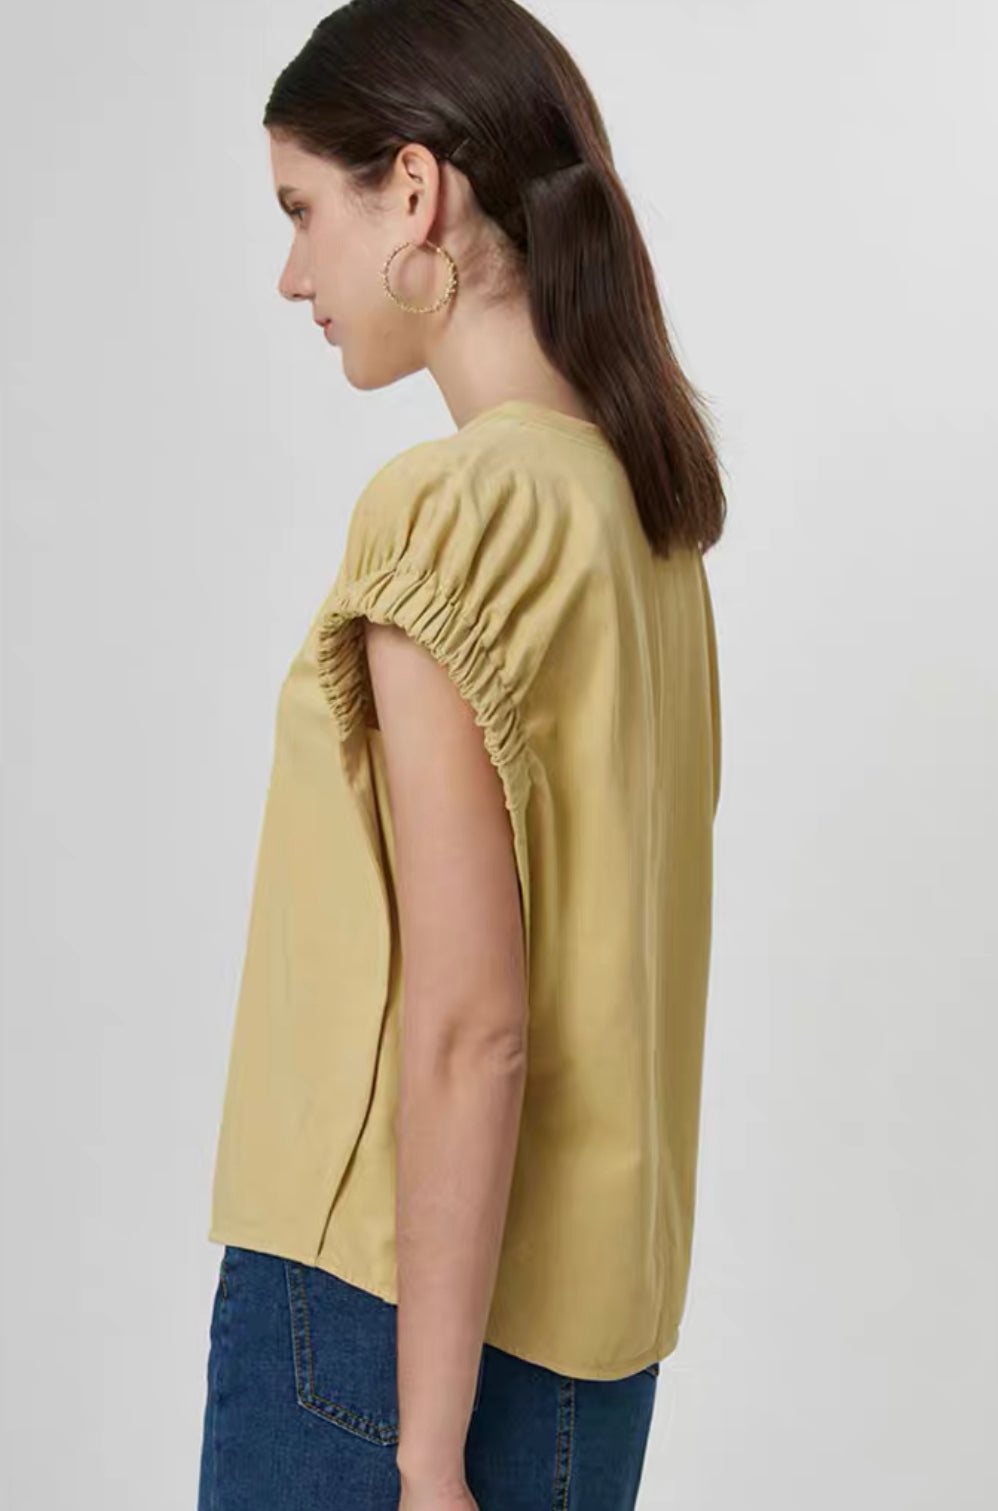 [Cool Tech] Gathered Sleeve Top in Yellow